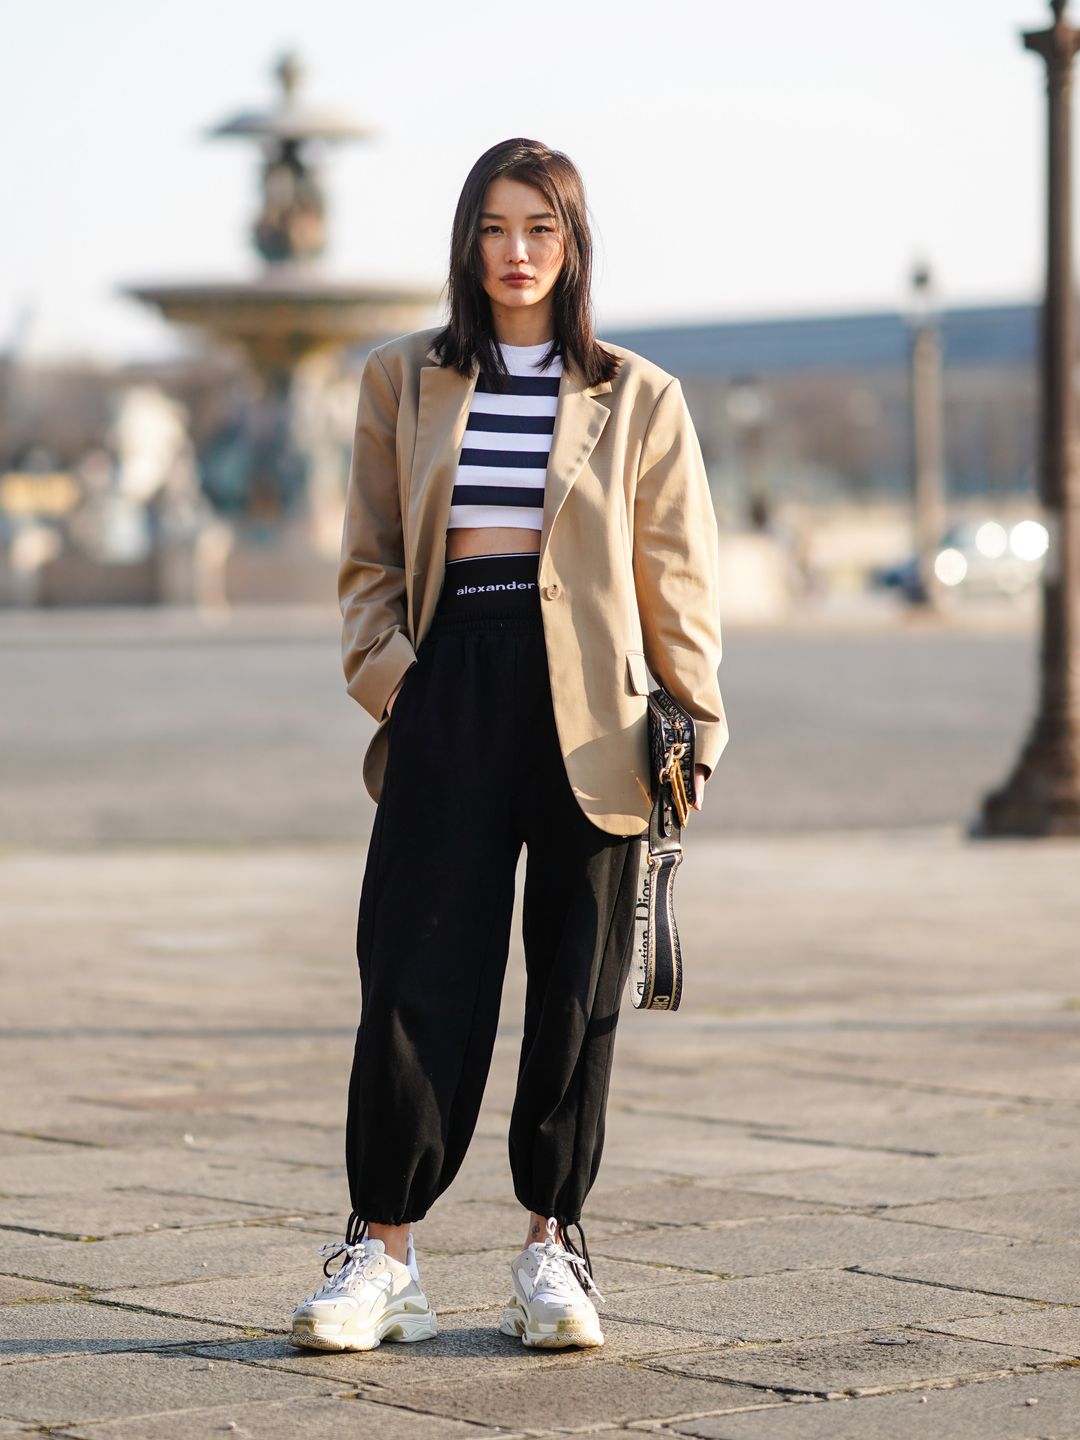 An oversize blazer in a light palette makes for ideal summer track pant style